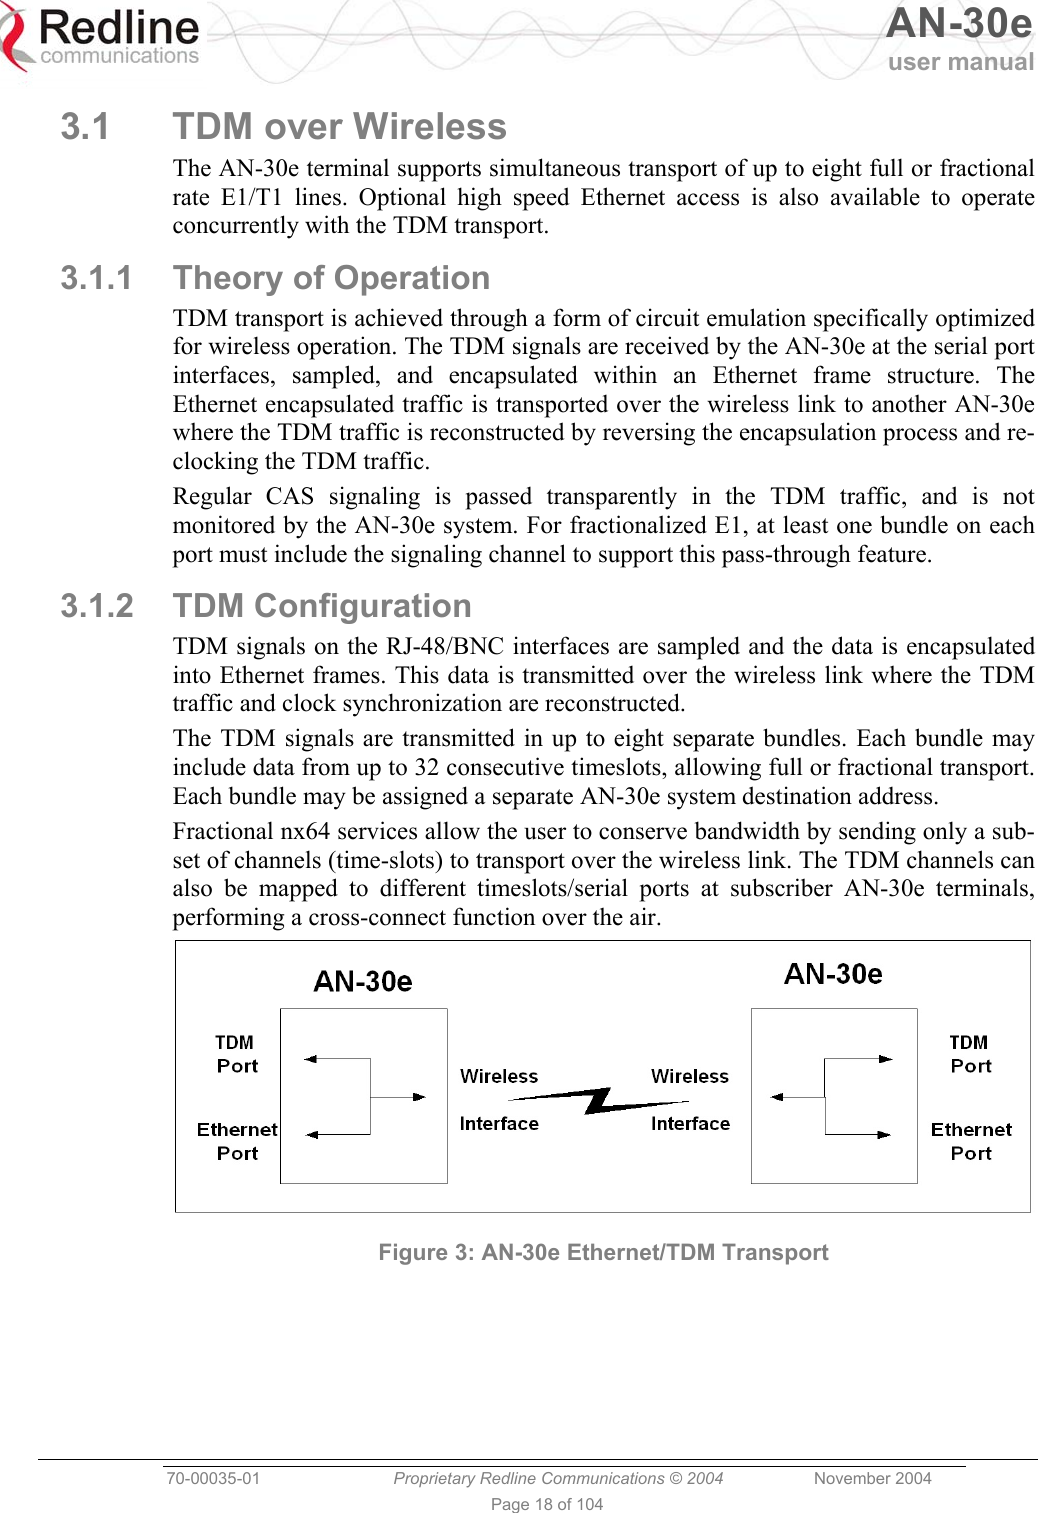   AN-30e user manual  70-00035-01  Proprietary Redline Communications © 2004 November 2004   Page 18 of 104 3.1  TDM over Wireless The AN-30e terminal supports simultaneous transport of up to eight full or fractional rate E1/T1 lines. Optional high speed Ethernet access is also available to operate concurrently with the TDM transport. 3.1.1  Theory of Operation TDM transport is achieved through a form of circuit emulation specifically optimized for wireless operation. The TDM signals are received by the AN-30e at the serial port interfaces, sampled, and encapsulated within an Ethernet frame structure. The Ethernet encapsulated traffic is transported over the wireless link to another AN-30e where the TDM traffic is reconstructed by reversing the encapsulation process and re-clocking the TDM traffic. Regular CAS signaling is passed transparently in the TDM traffic, and is not monitored by the AN-30e system. For fractionalized E1, at least one bundle on each port must include the signaling channel to support this pass-through feature. 3.1.2 TDM Configuration TDM signals on the RJ-48/BNC interfaces are sampled and the data is encapsulated into Ethernet frames. This data is transmitted over the wireless link where the TDM traffic and clock synchronization are reconstructed. The TDM signals are transmitted in up to eight separate bundles. Each bundle may include data from up to 32 consecutive timeslots, allowing full or fractional transport. Each bundle may be assigned a separate AN-30e system destination address. Fractional nx64 services allow the user to conserve bandwidth by sending only a sub-set of channels (time-slots) to transport over the wireless link. The TDM channels can also be mapped to different timeslots/serial ports at subscriber AN-30e terminals, performing a cross-connect function over the air.  Figure 3: AN-30e Ethernet/TDM Transport 